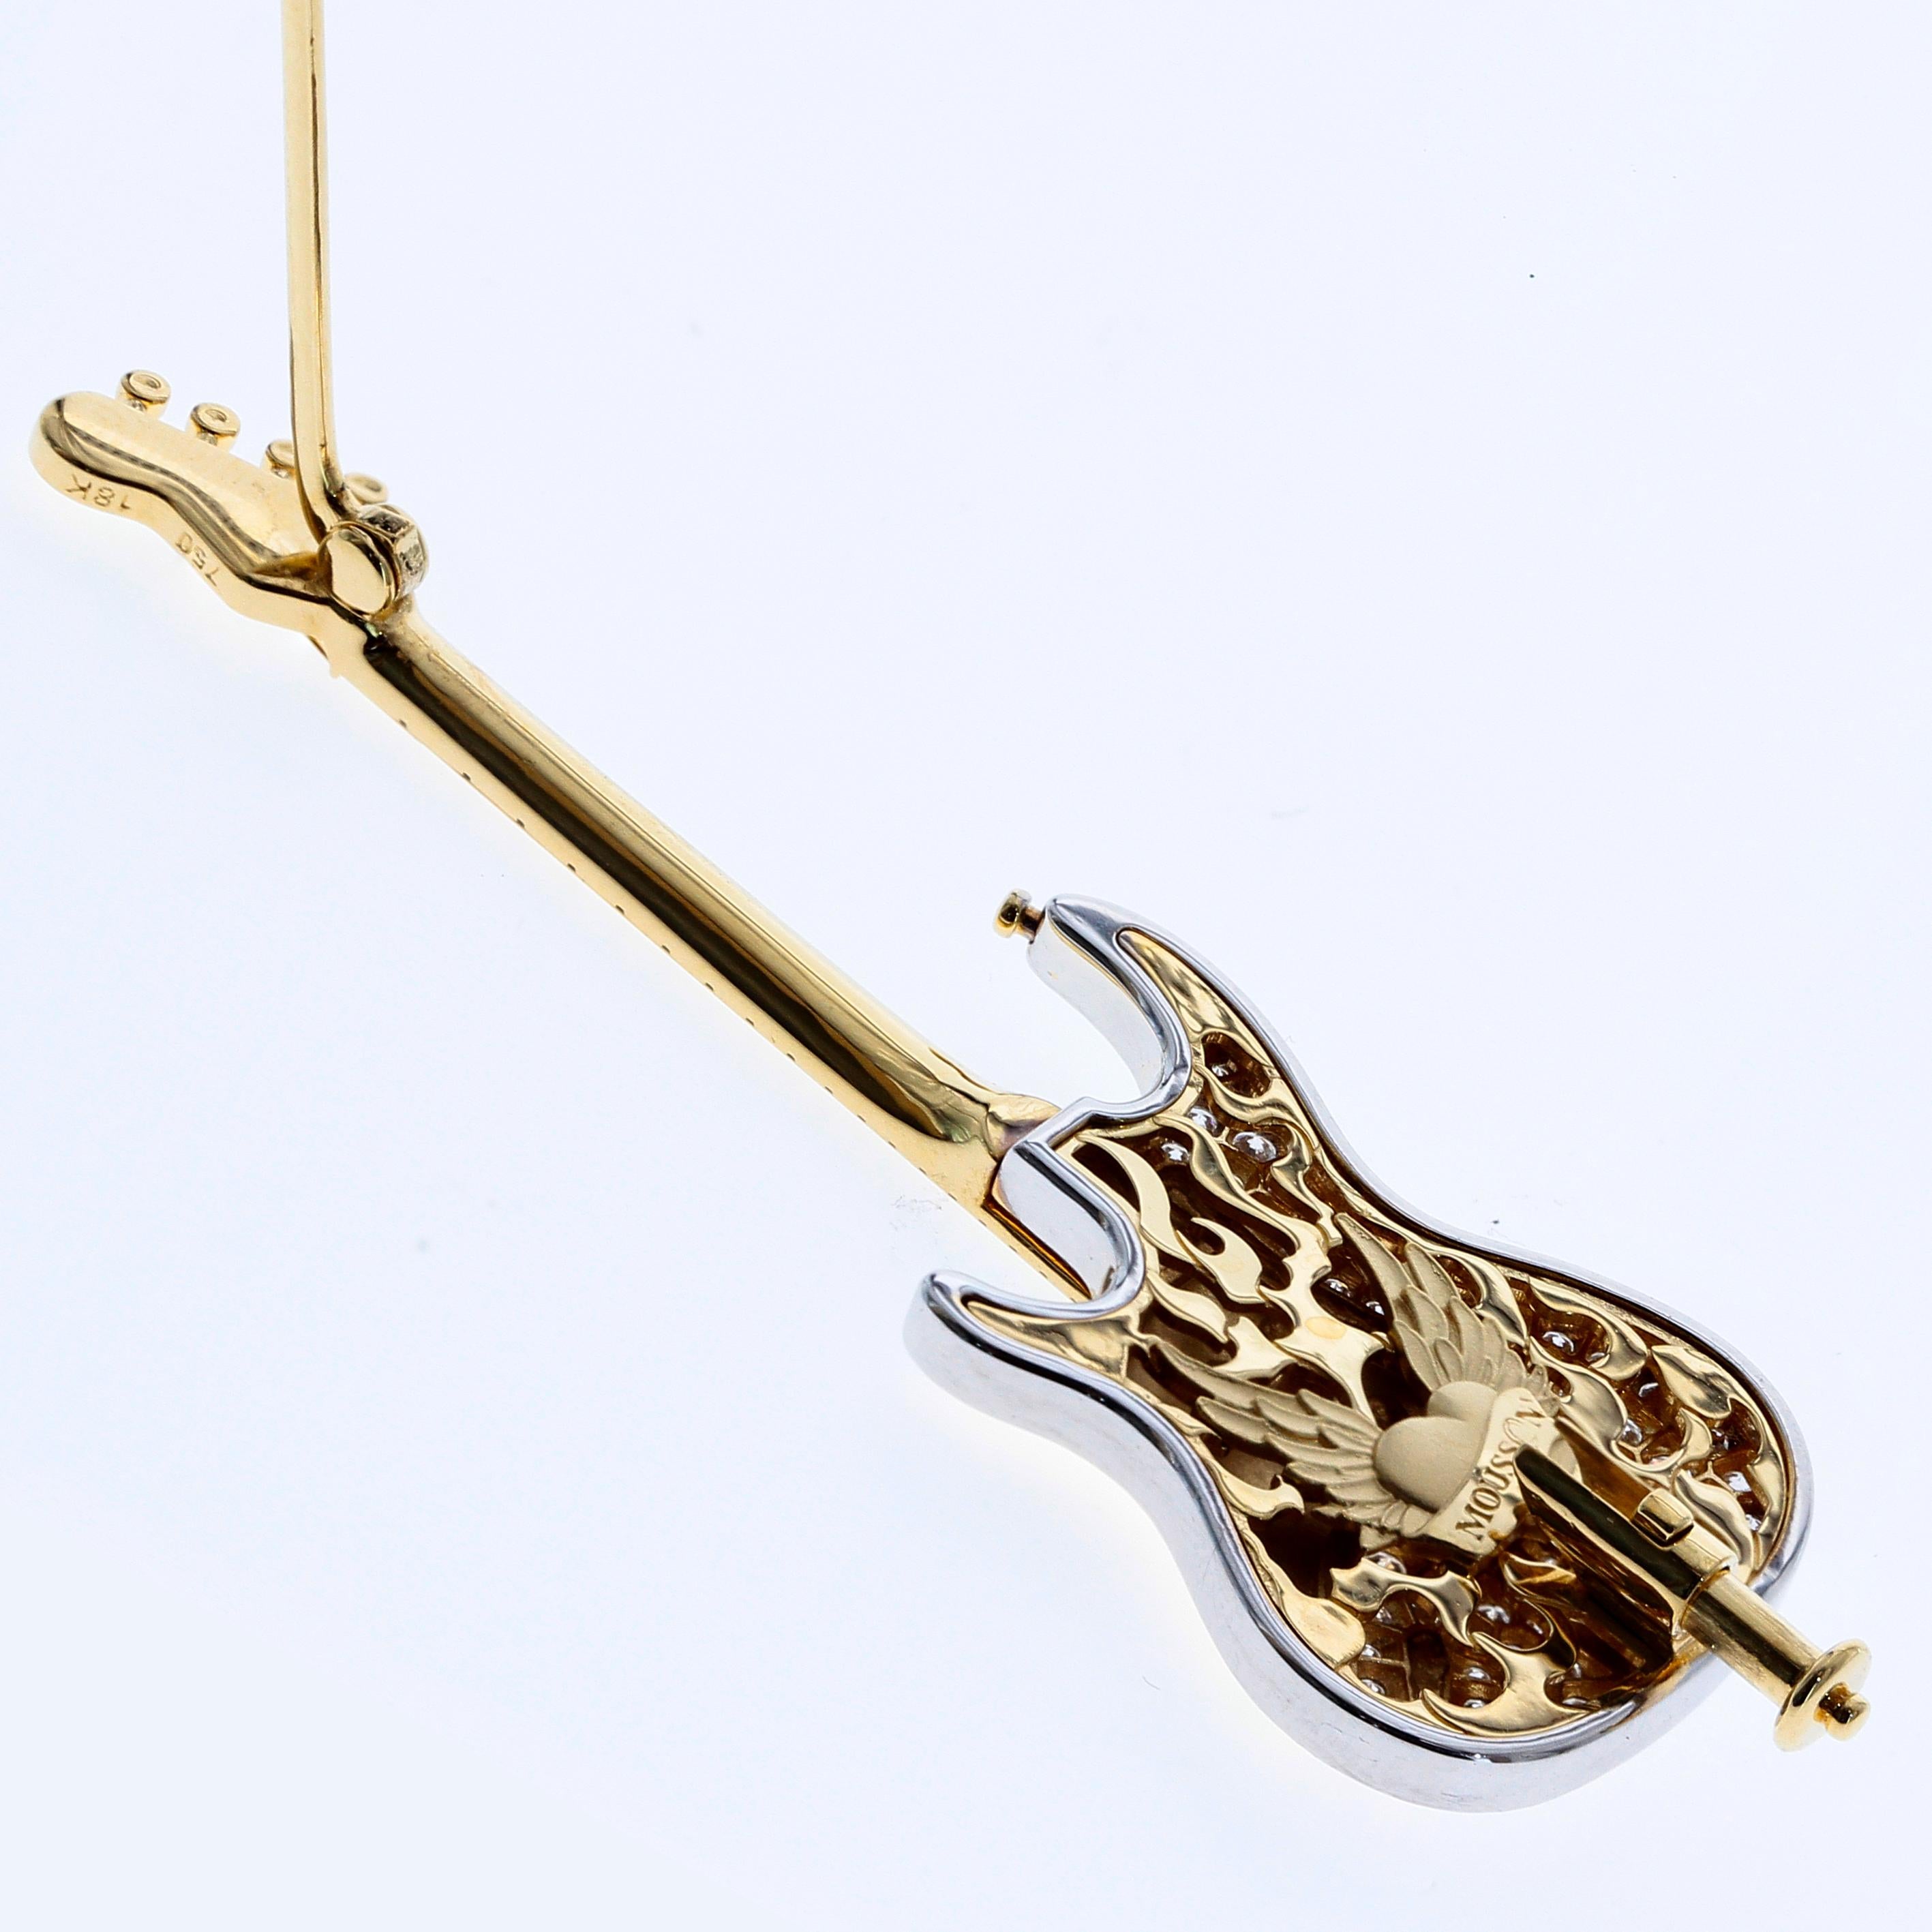 Diamonds 18 Karat Yellow Gold Guitar Brooch

Crafted from luxurious 18K yellow gold, this Diamonds Guitar Brooch from the Rock-n-Roll part of Artistic Collection radiates sophisticated artistry. Sparkling diamonds adorn the top of the instrument in